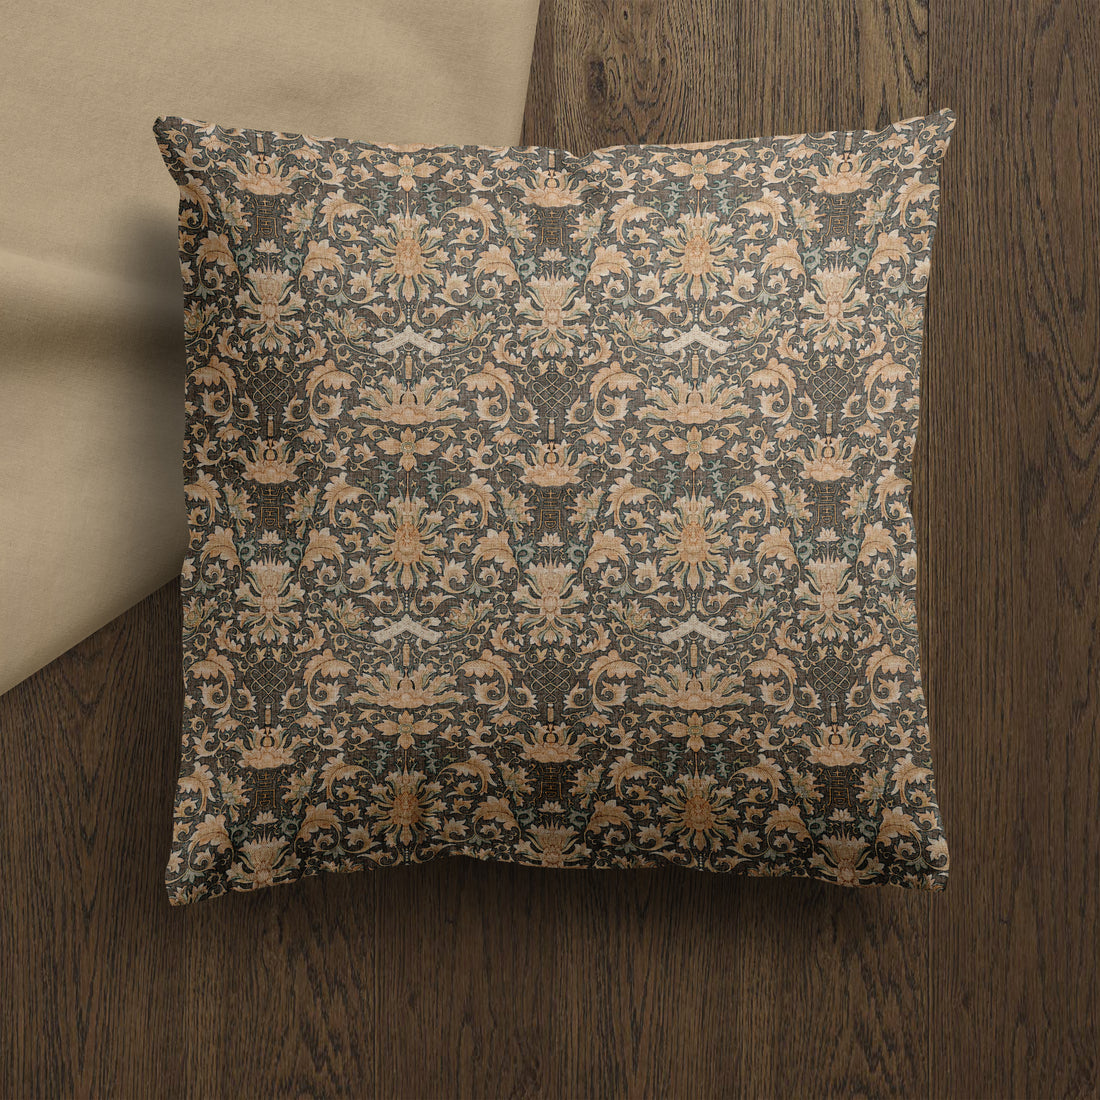 Niamh | Damask Vintage Pillow Cover